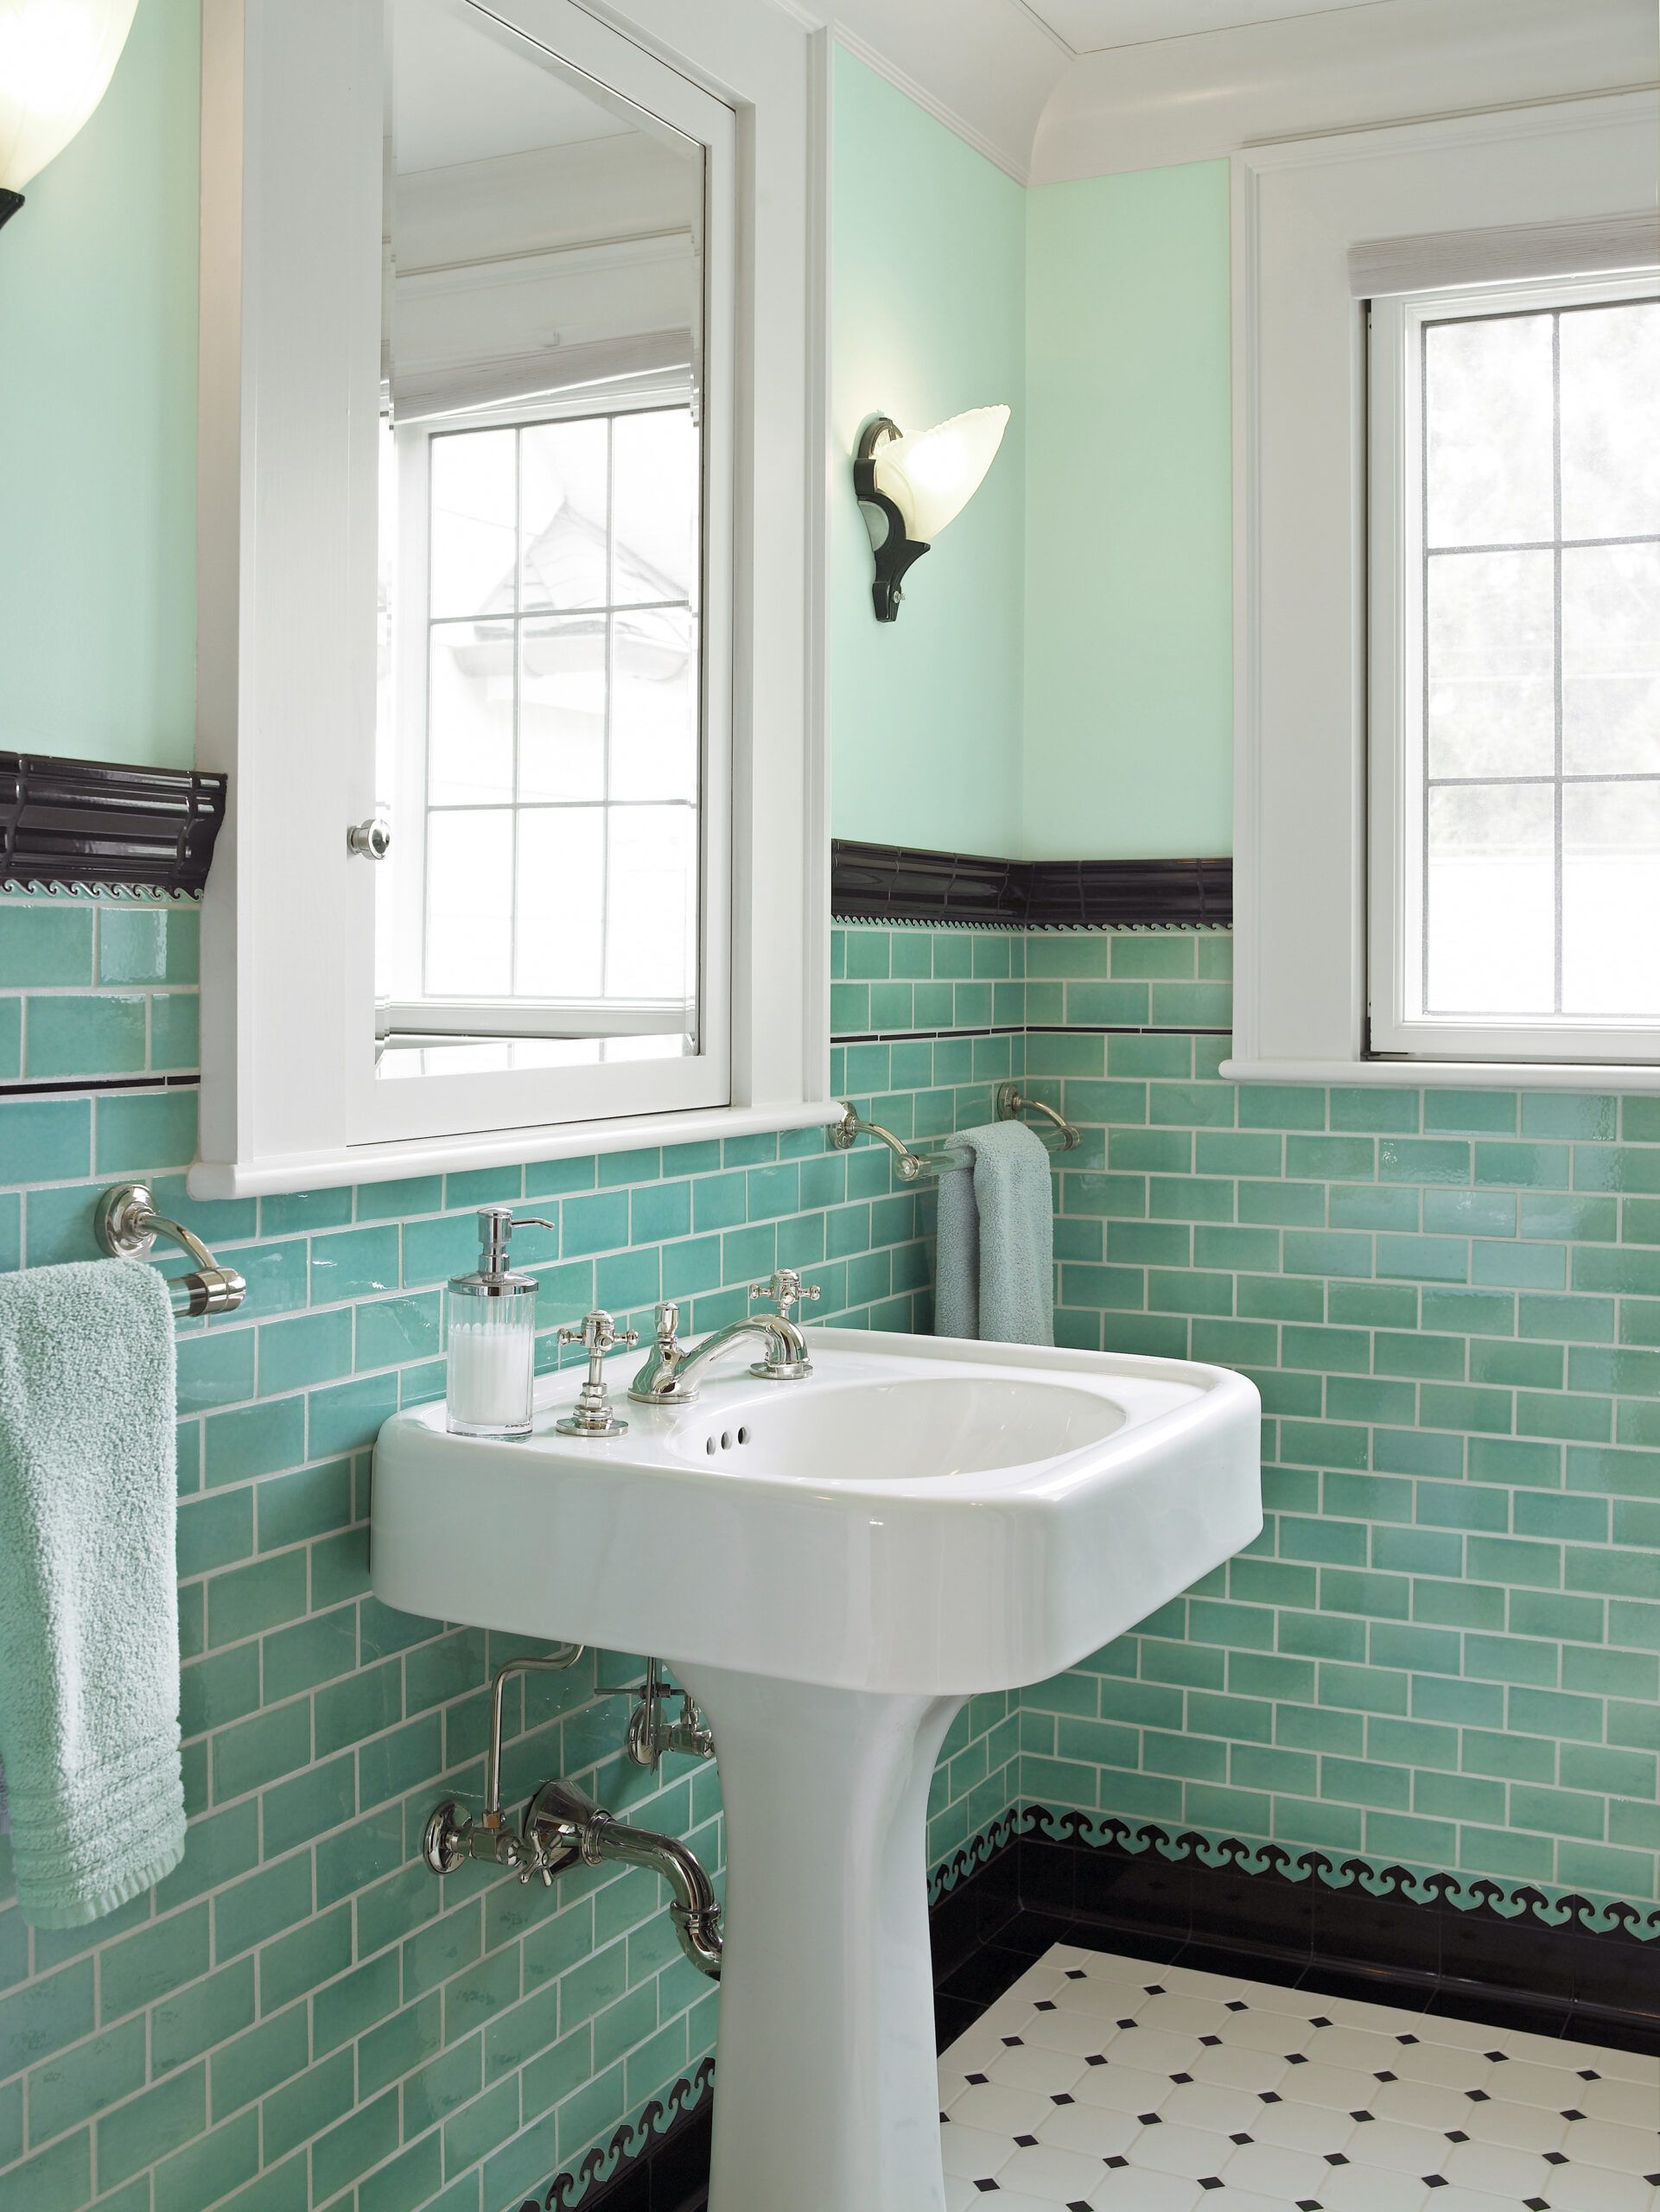 All About Ceramic Subway Tile - This Old House